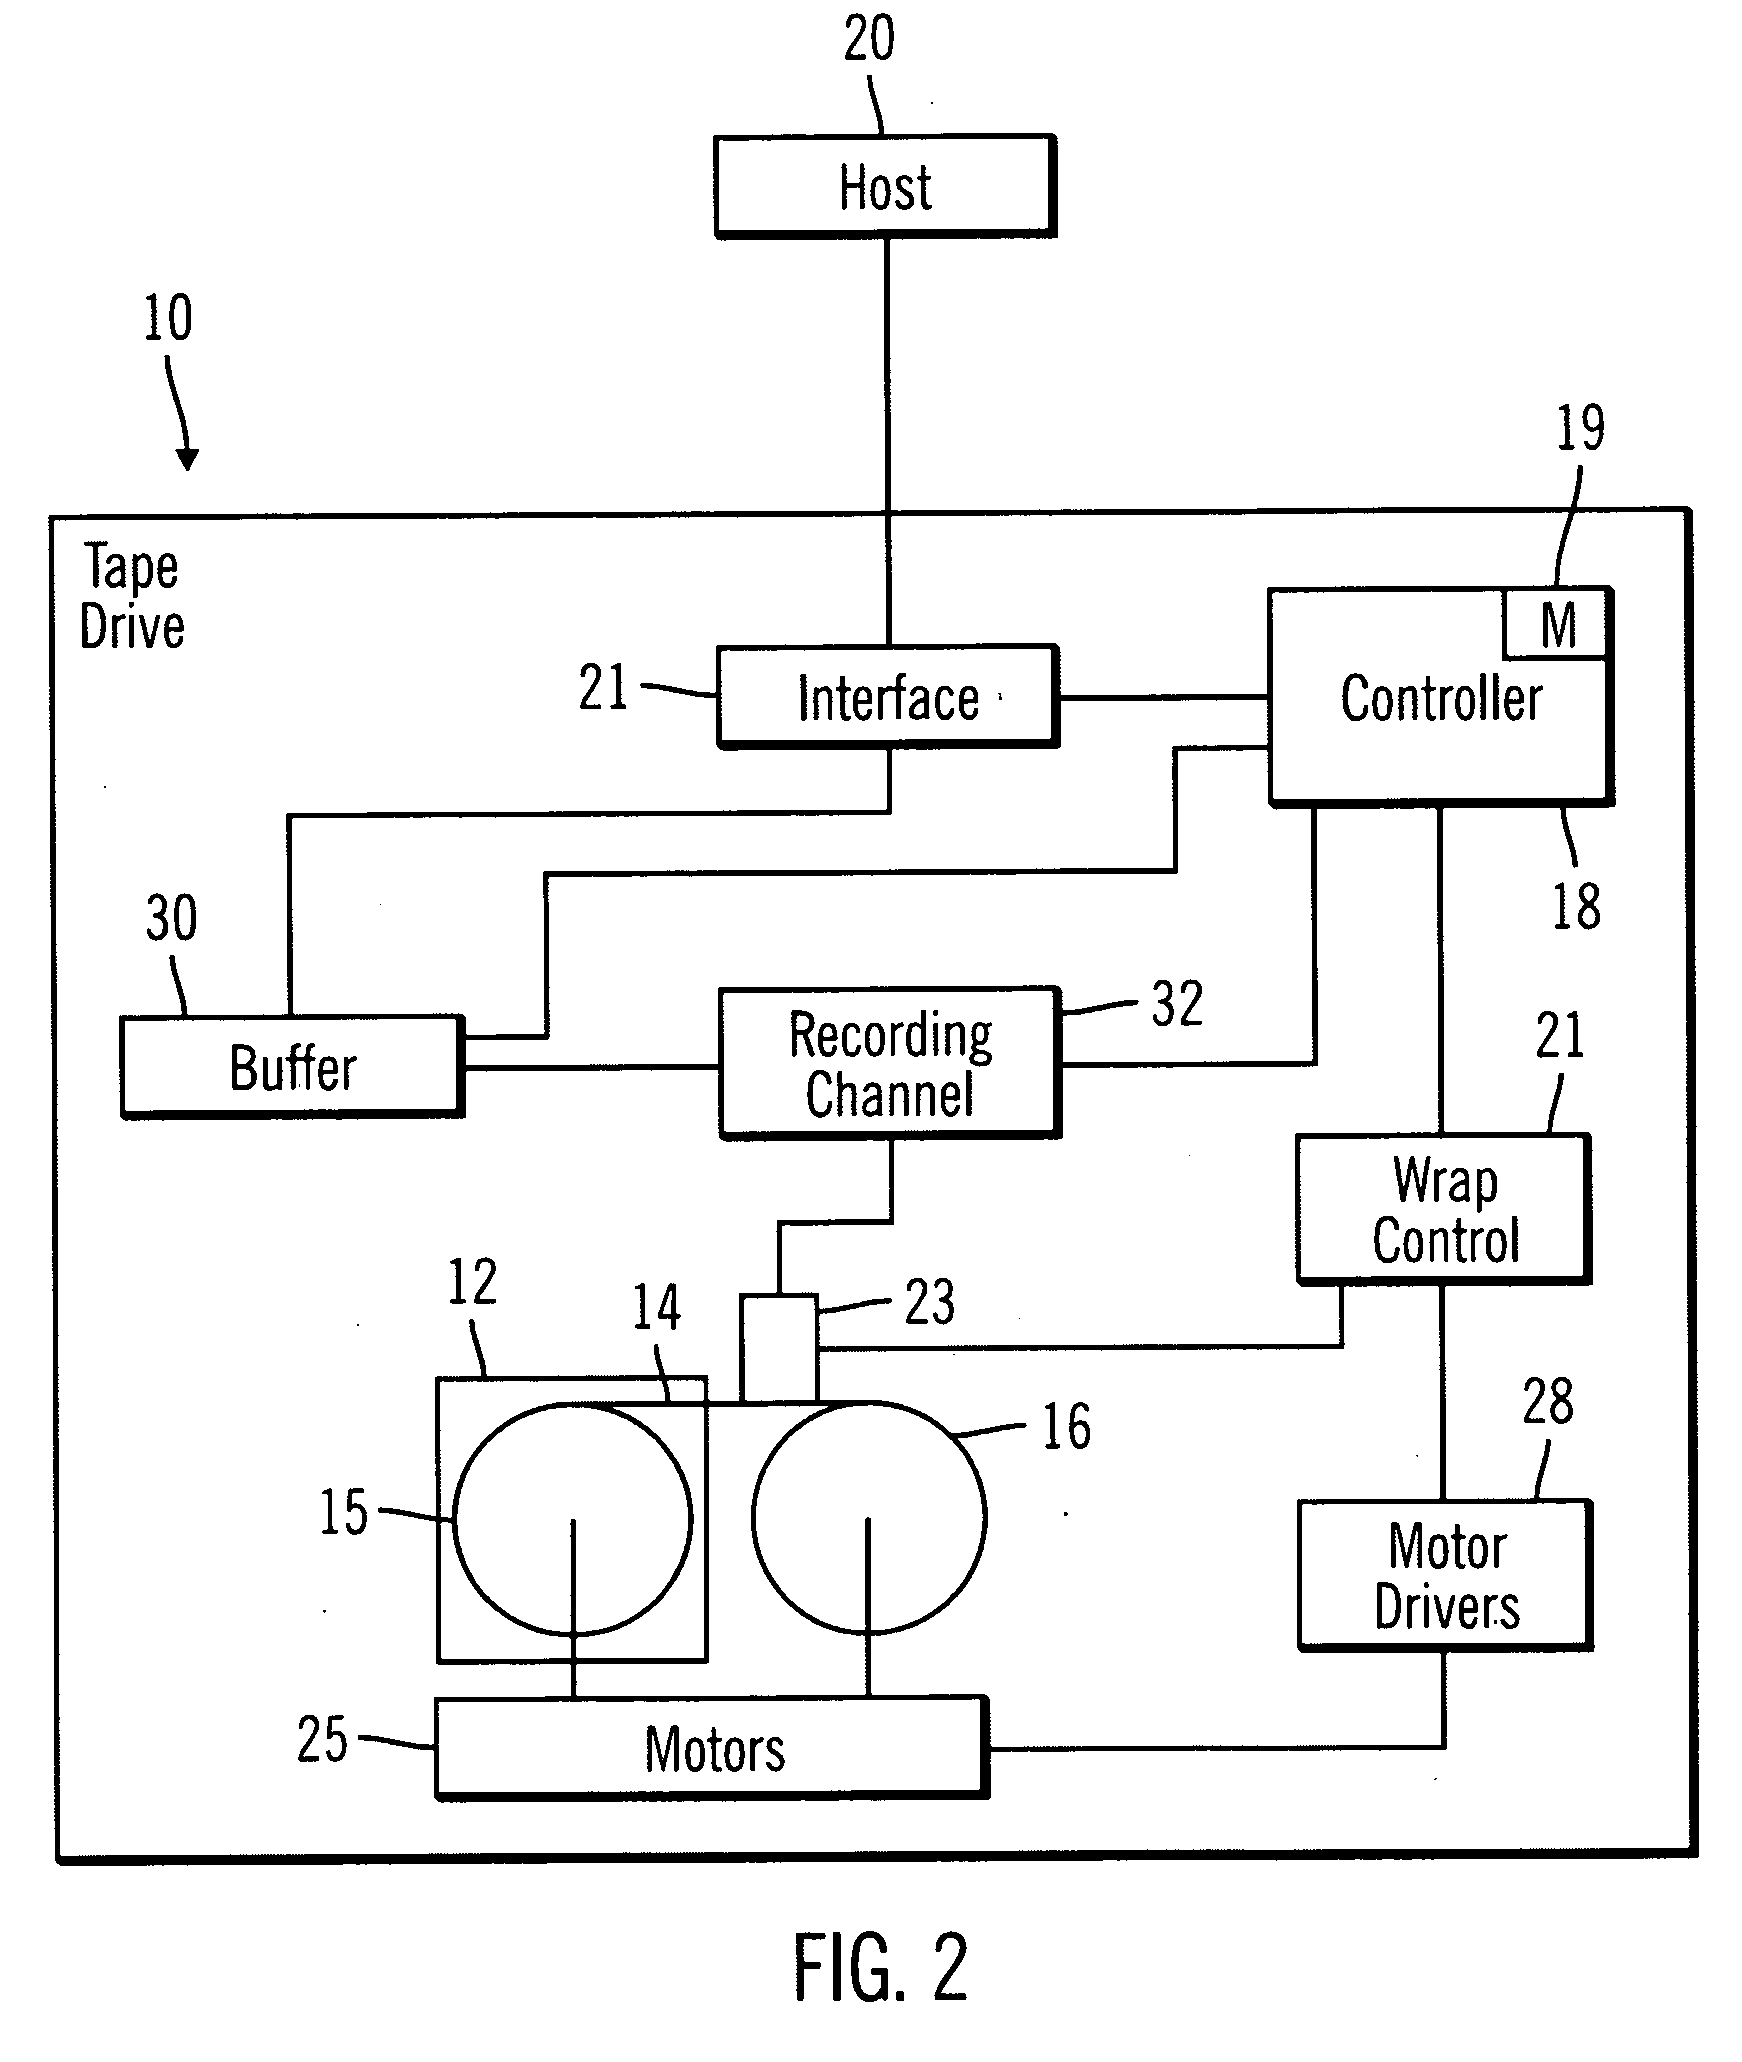 Recovering servo information from a synchronous servo channel